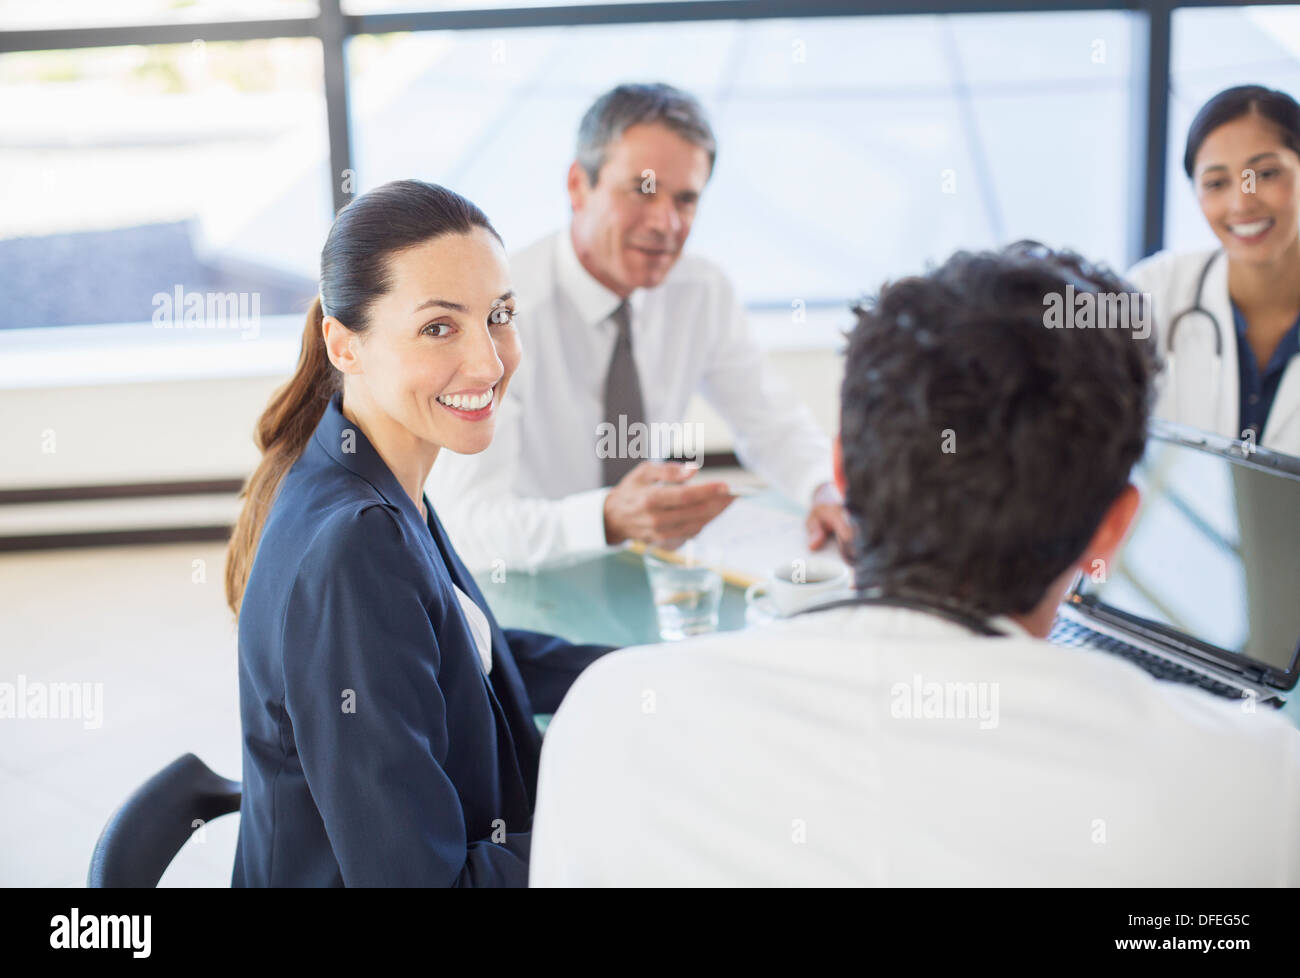 Businesswoman smiling in meeting Banque D'Images